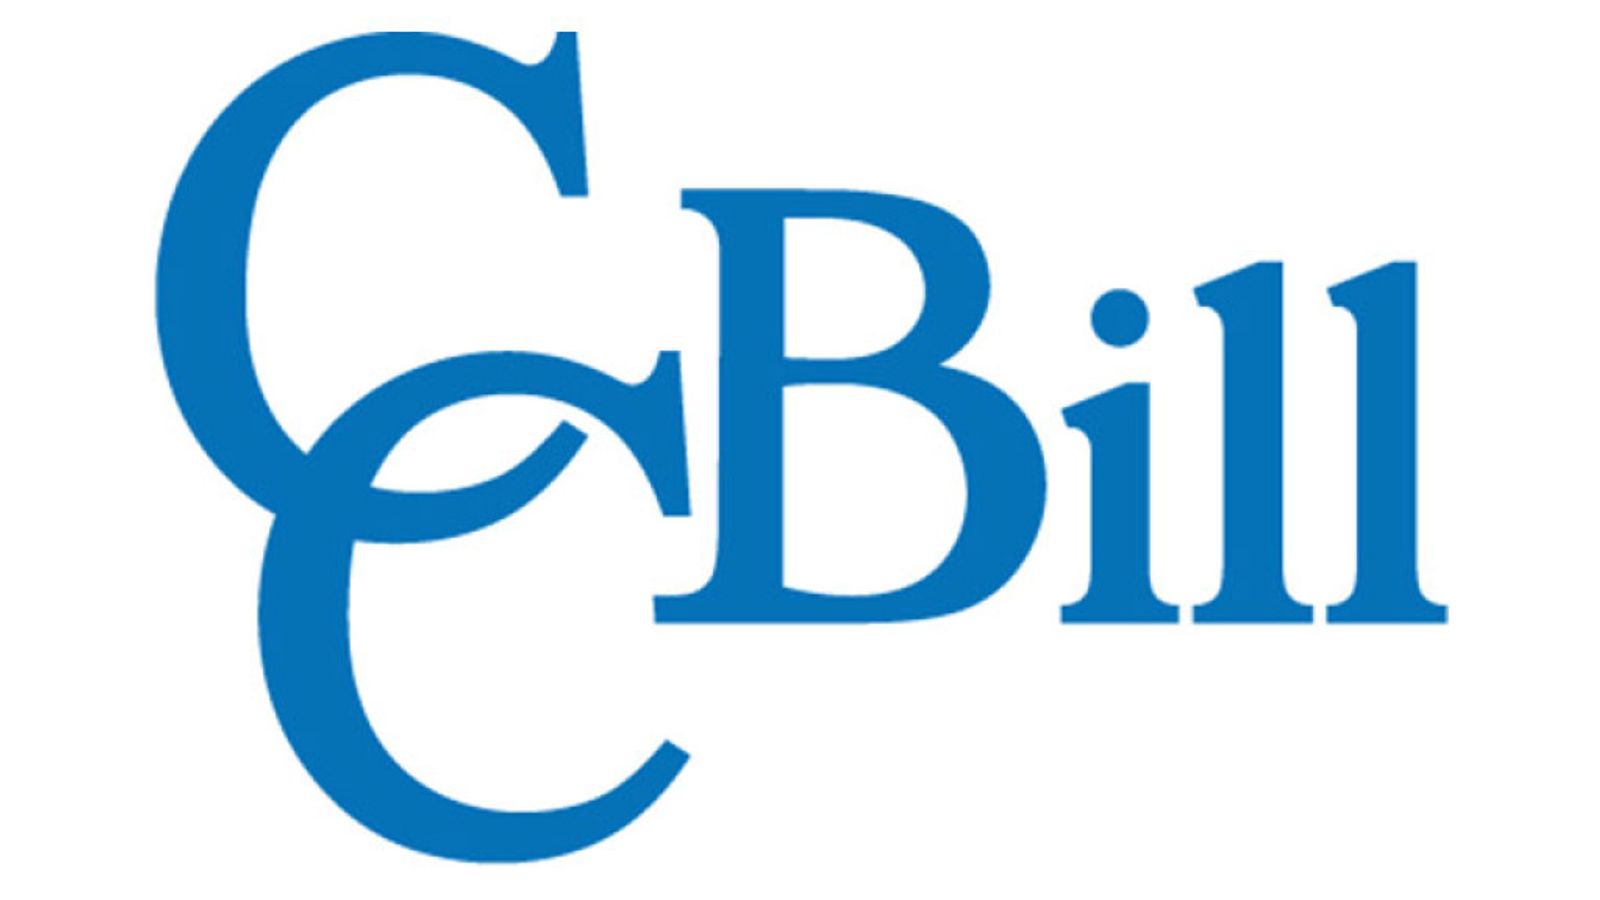 CCBill Releases New Settlement Payout Options